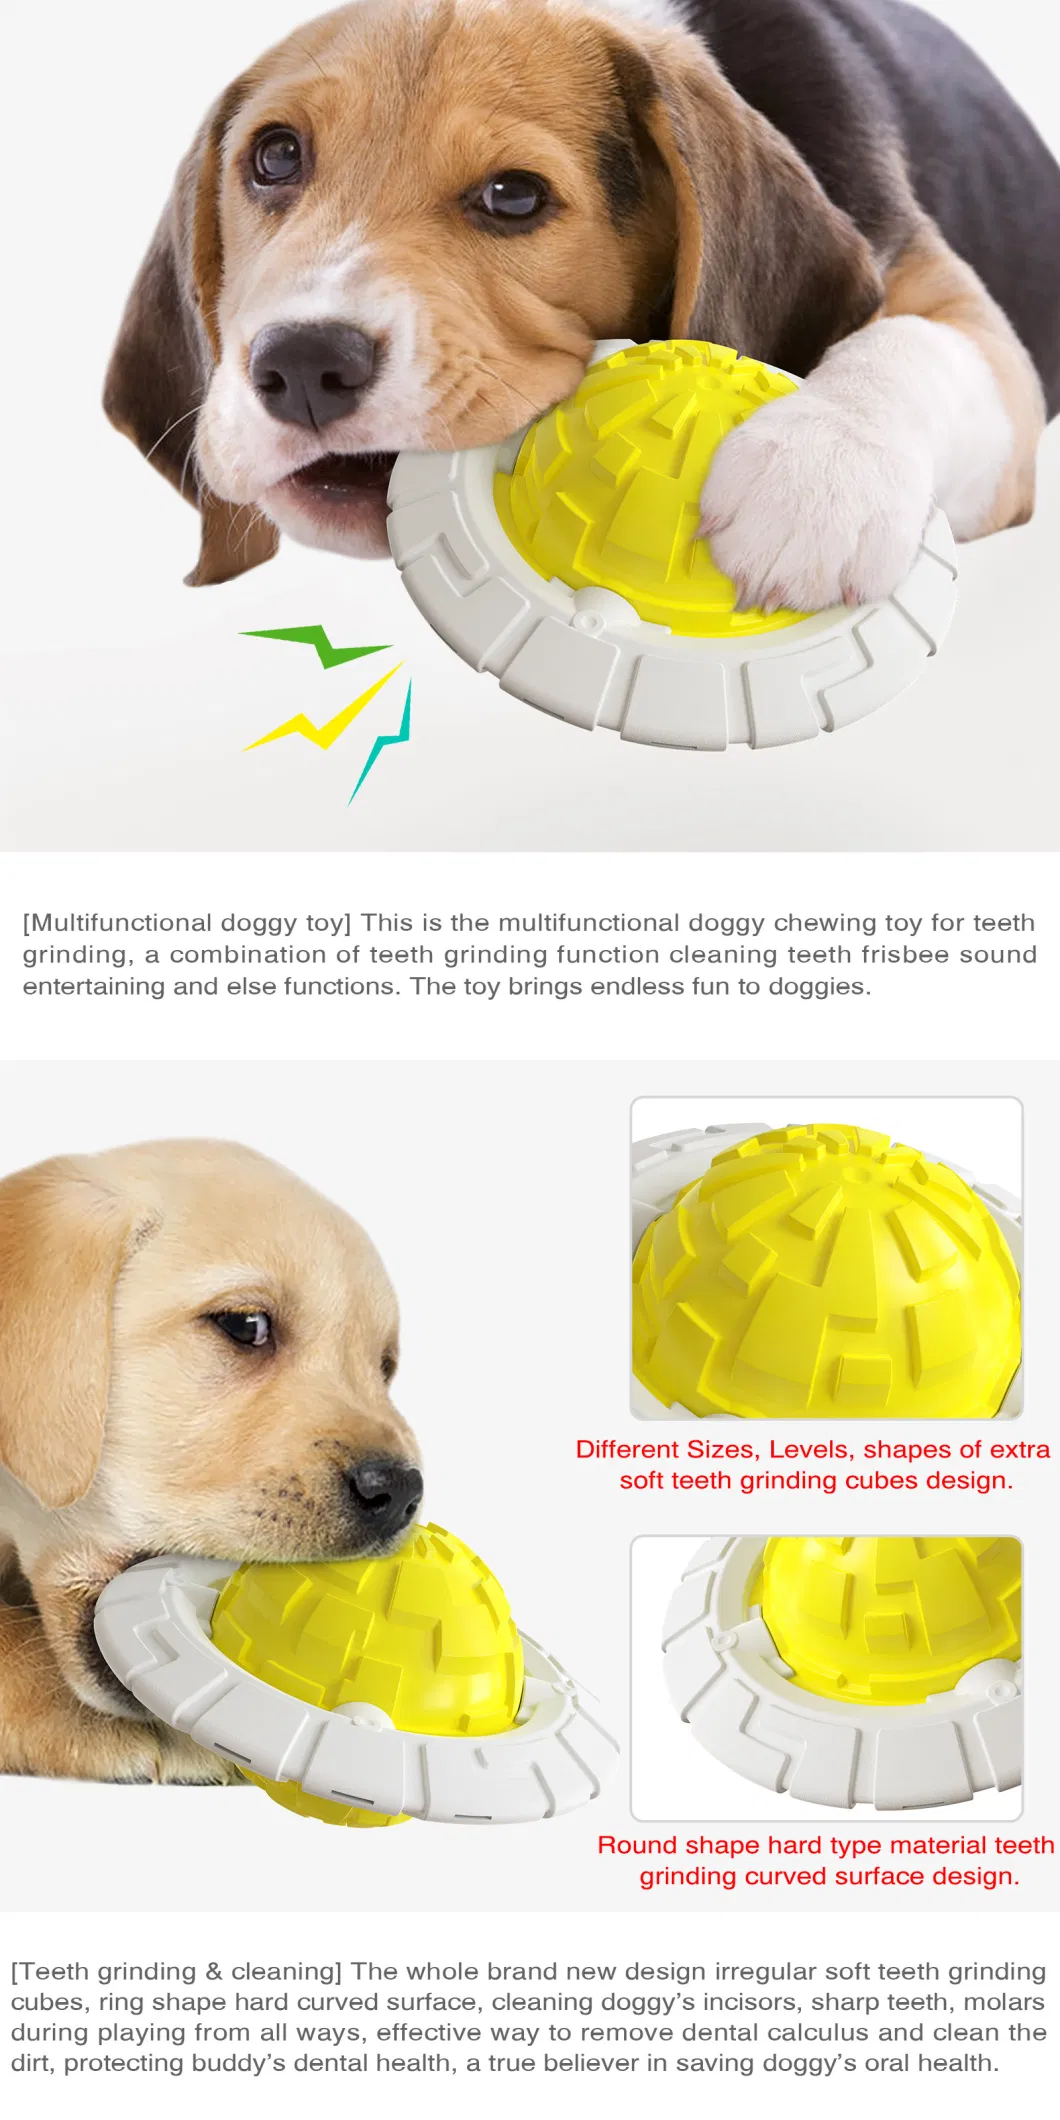 Dog Squeaky Balls Outdoor Sports Molar Bite Chew Toy Training Indestructible Puppy Pet Teething Treat Clean Fun Play